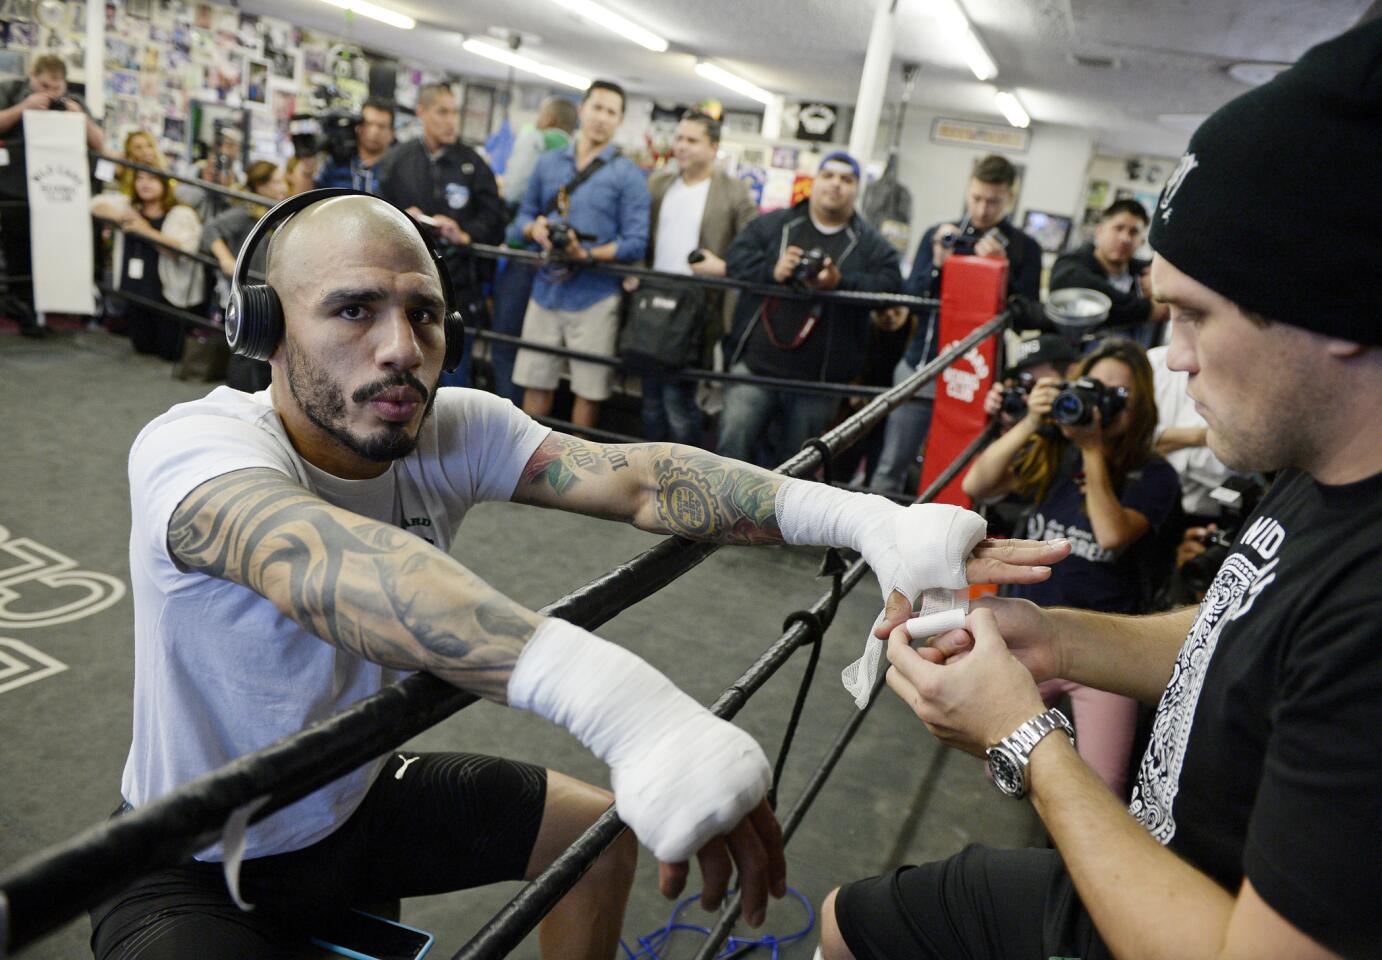 HOLLYWOOD CA - NOVEMBER 3: Boxer Miguel Cotto has his hands wrapped up before a media workout at Wild Card Boxing Club November 4, 2015, in Hollywood, California. Cotto and former WBC and WBA Super Welterweight World Champion Canelo Alvarez will face each other for the middleweight world championship on November 21 in Las Vegas, Nevada. (Photo by Kevork Djansezian/Getty Images) ** OUTS - ELSENT, FPG, CM - OUTS * NM, PH, VA if sourced by CT, LA or MoD **